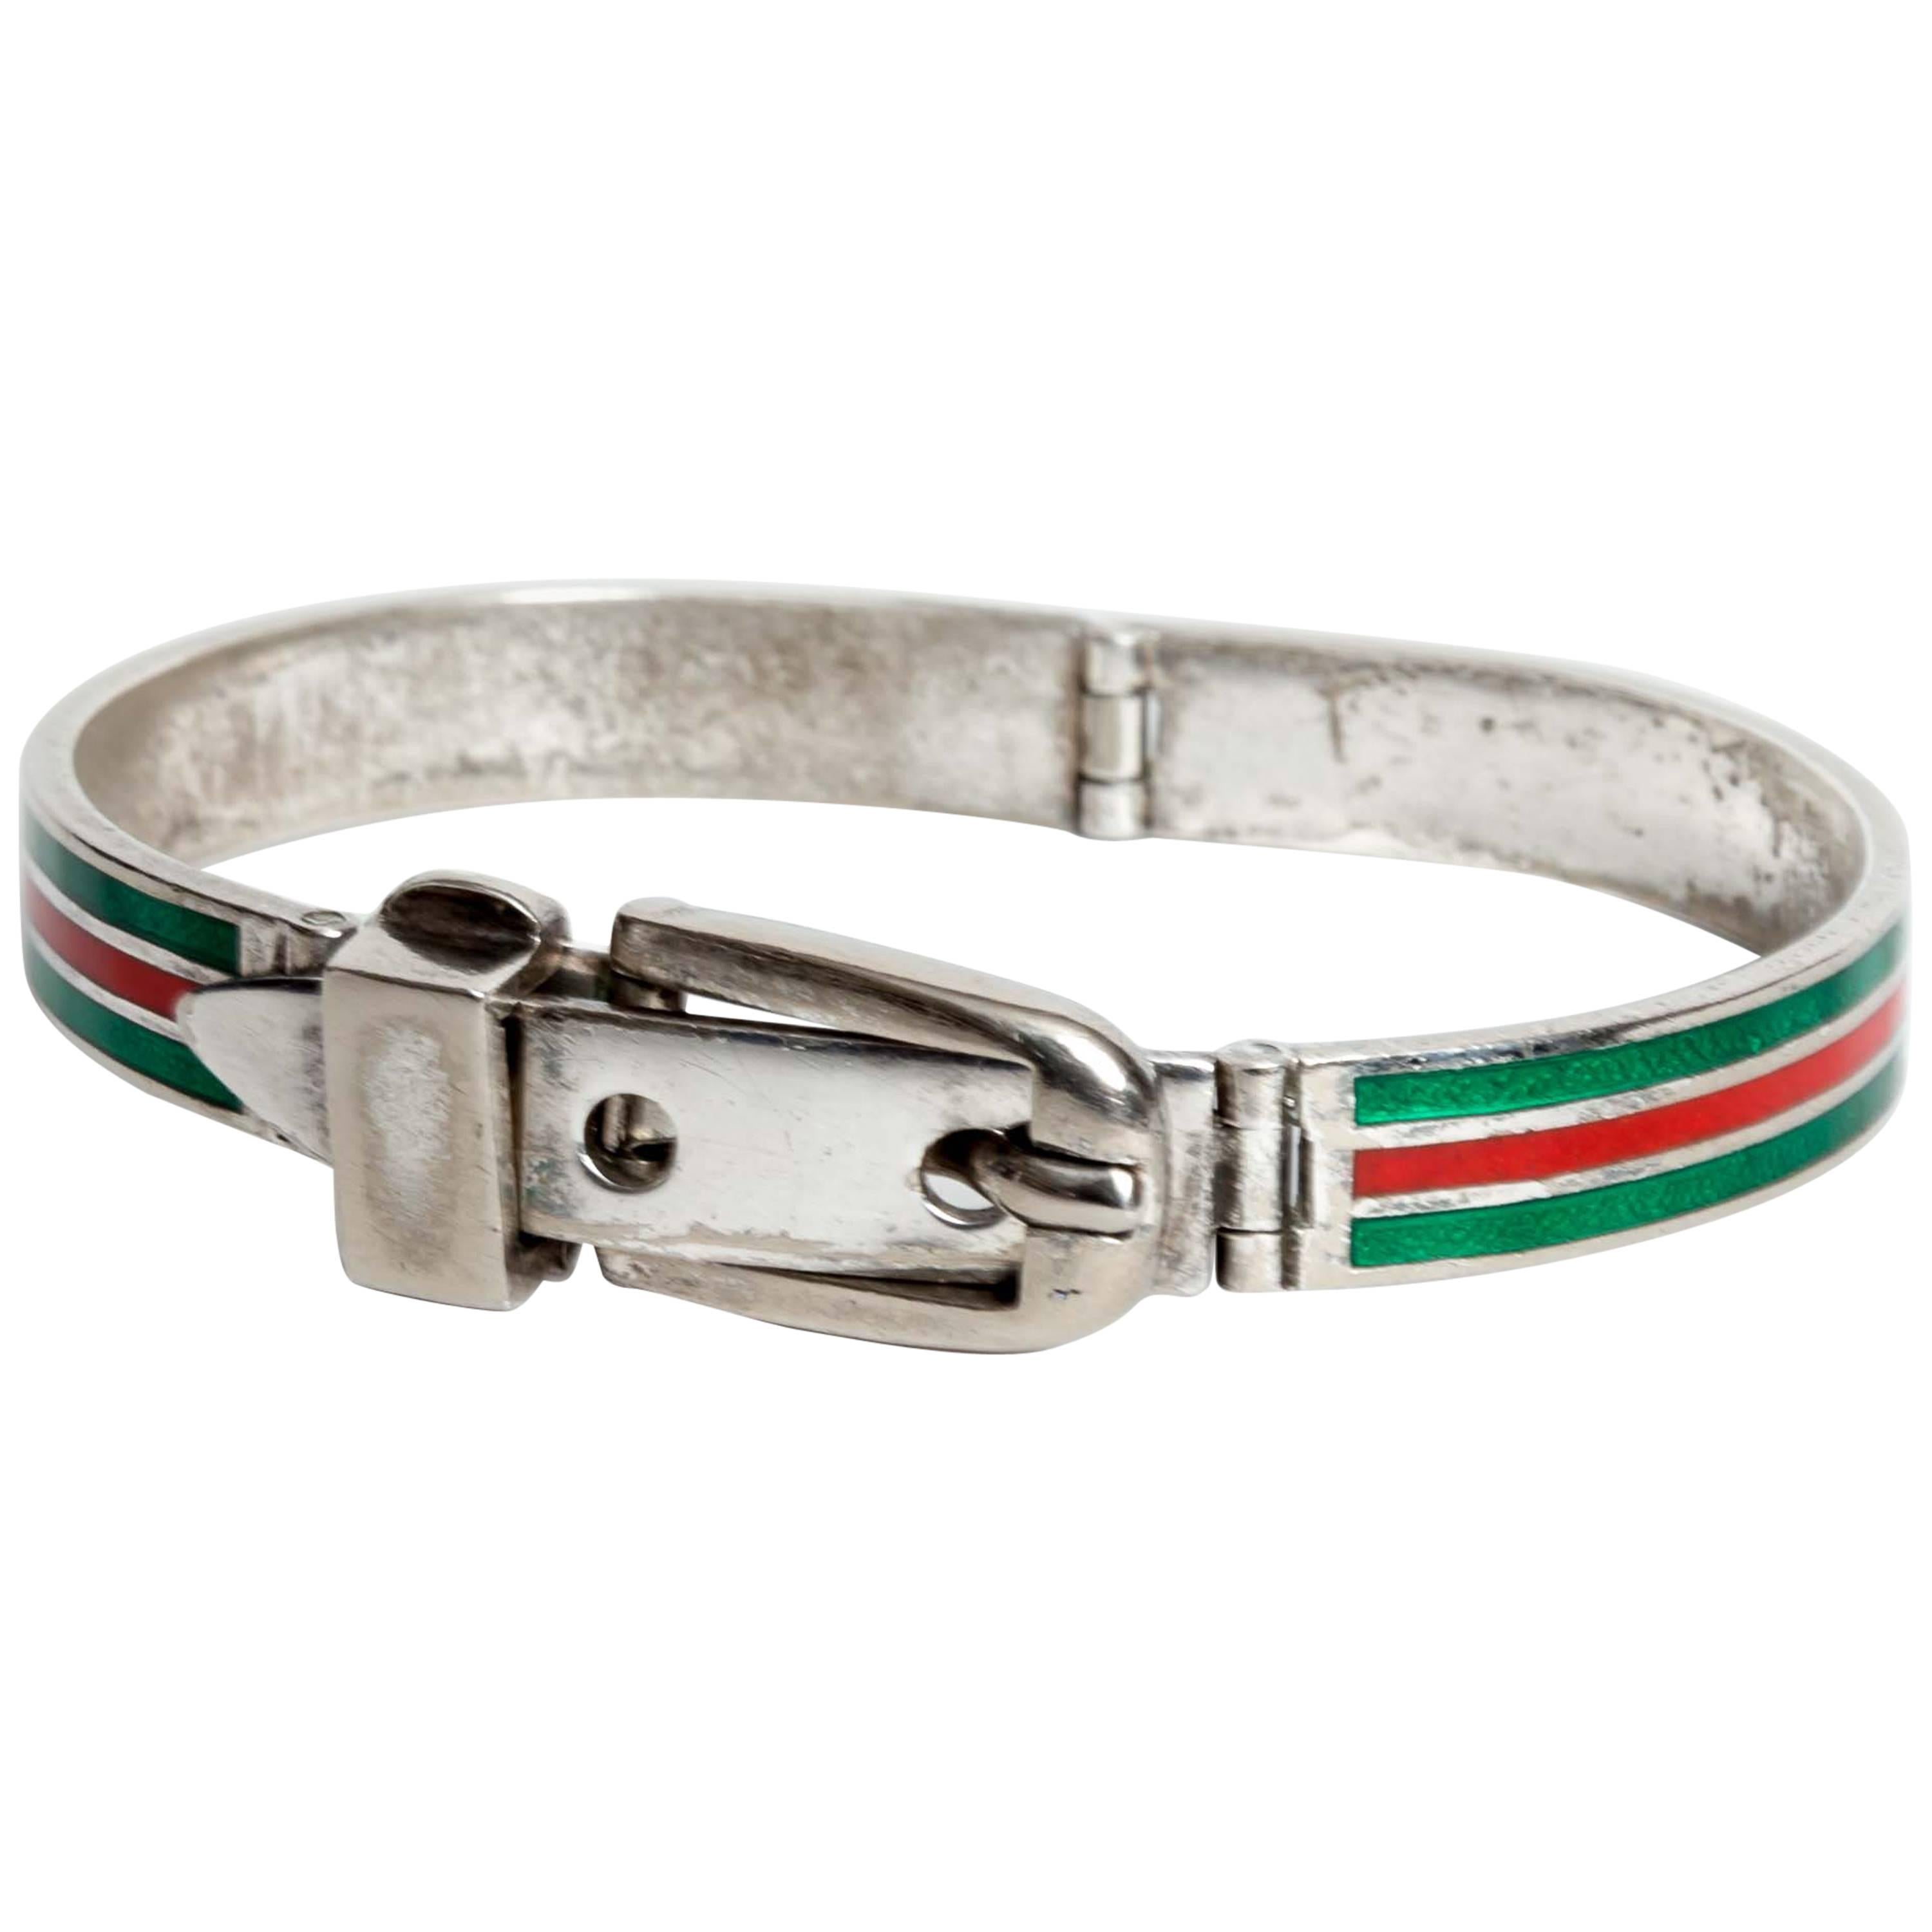 Vintage Gucci Sterling Silver Bracelet with Iconic Red and Green Enamel Stripes